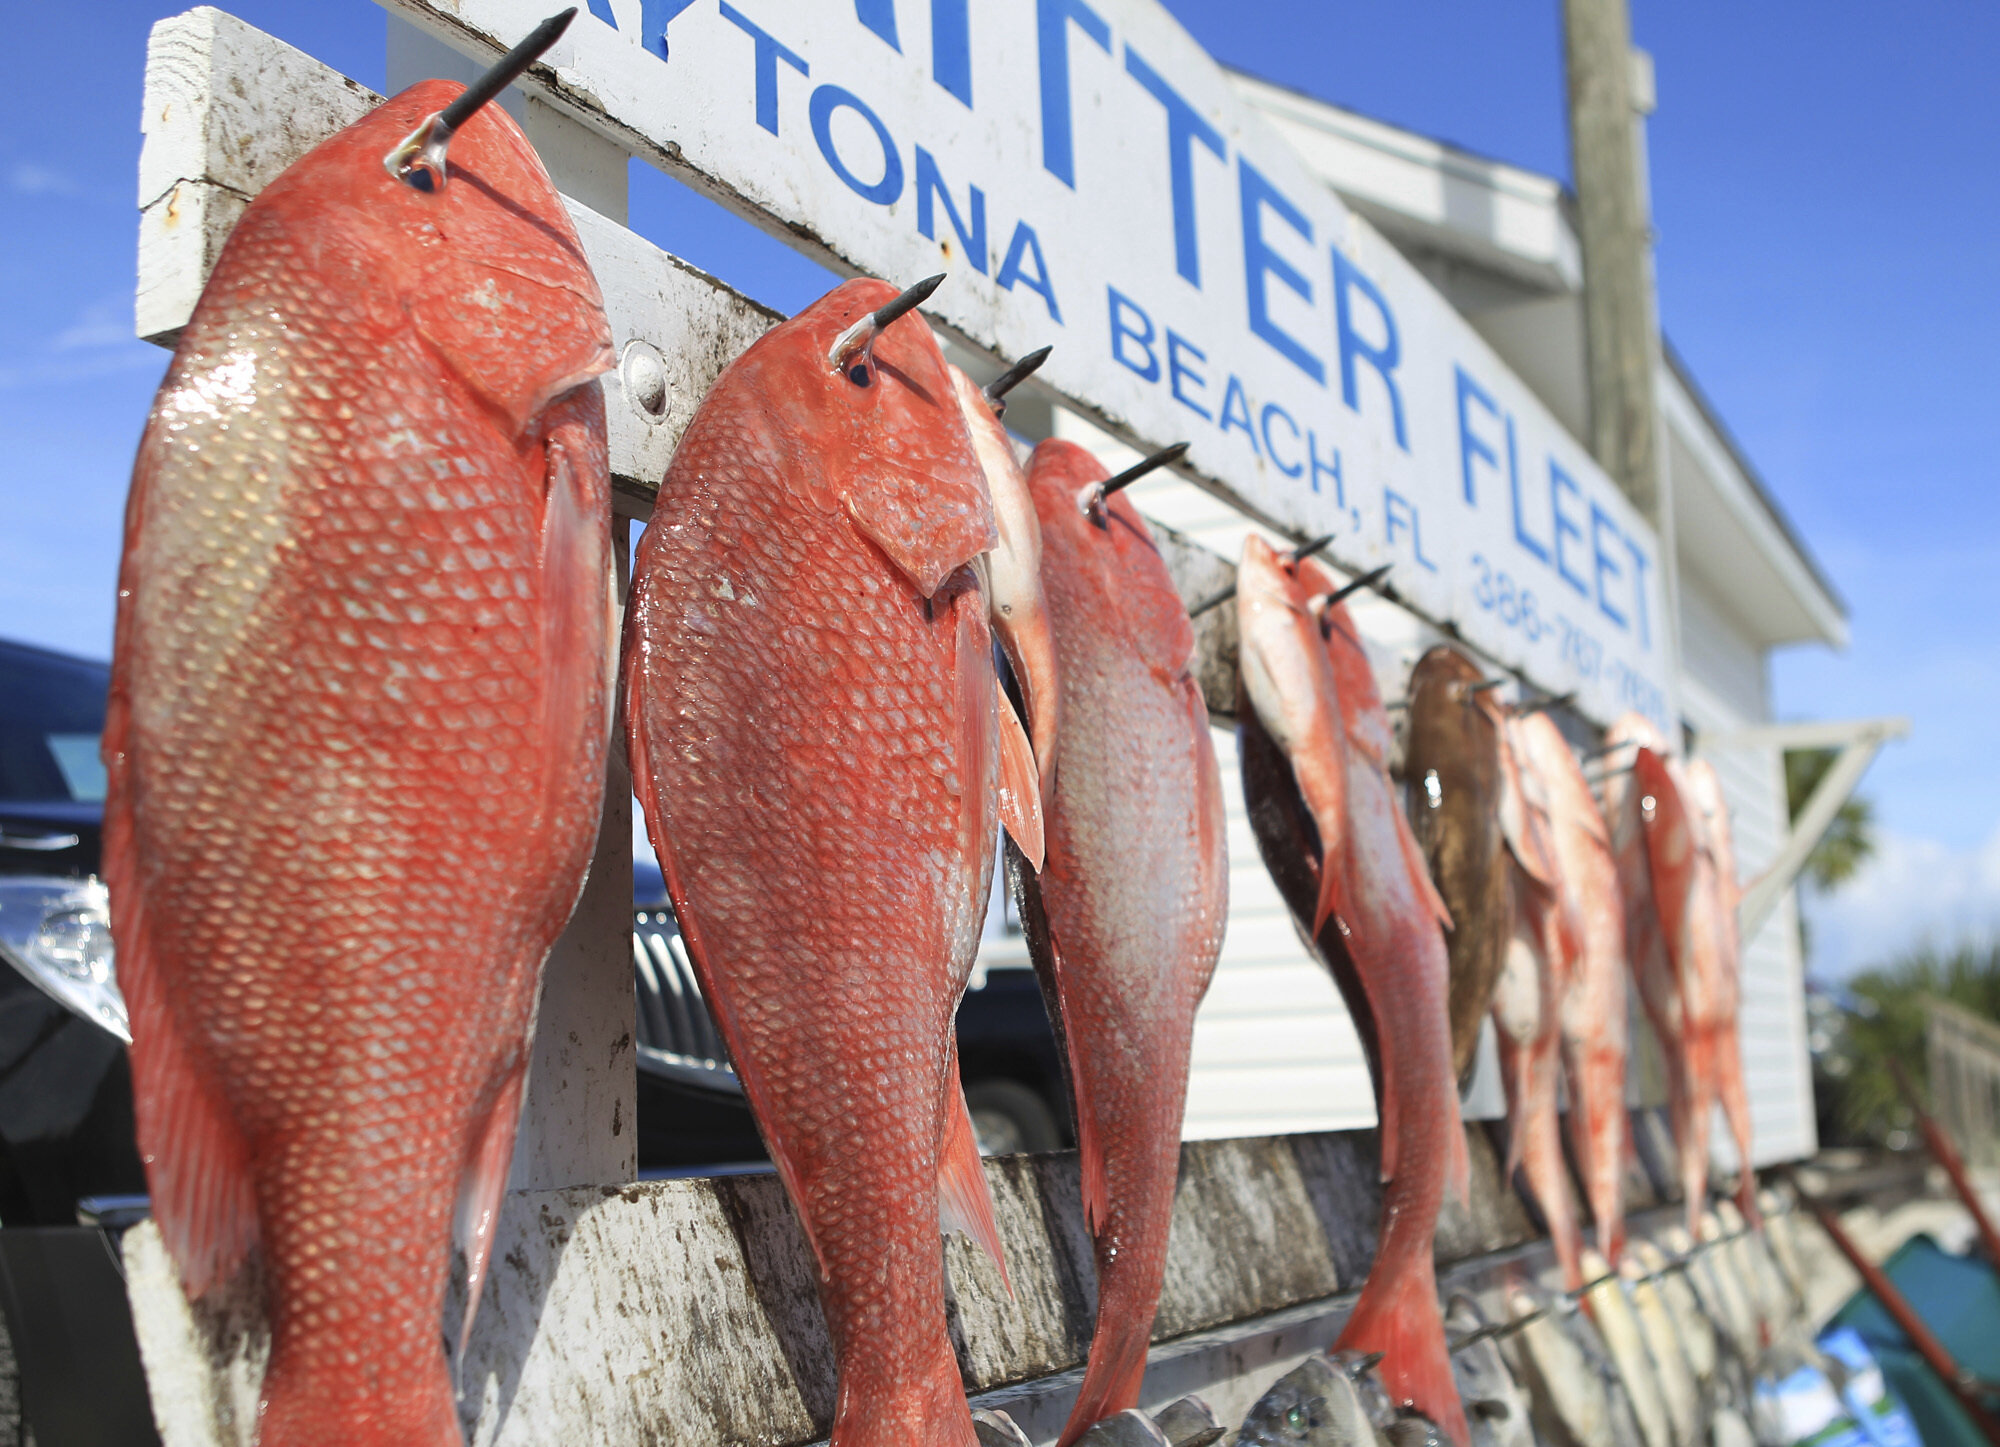 New study triples estimate of red snapper in Gulf of Mexico